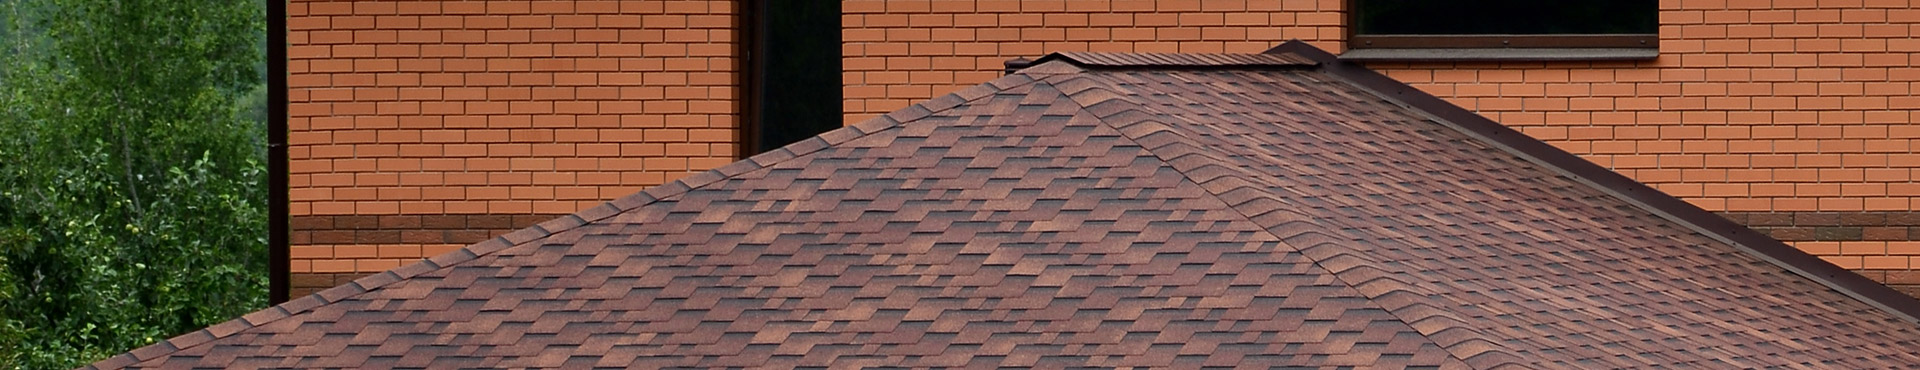 Roof Replacement Services | Zicklin Roofing